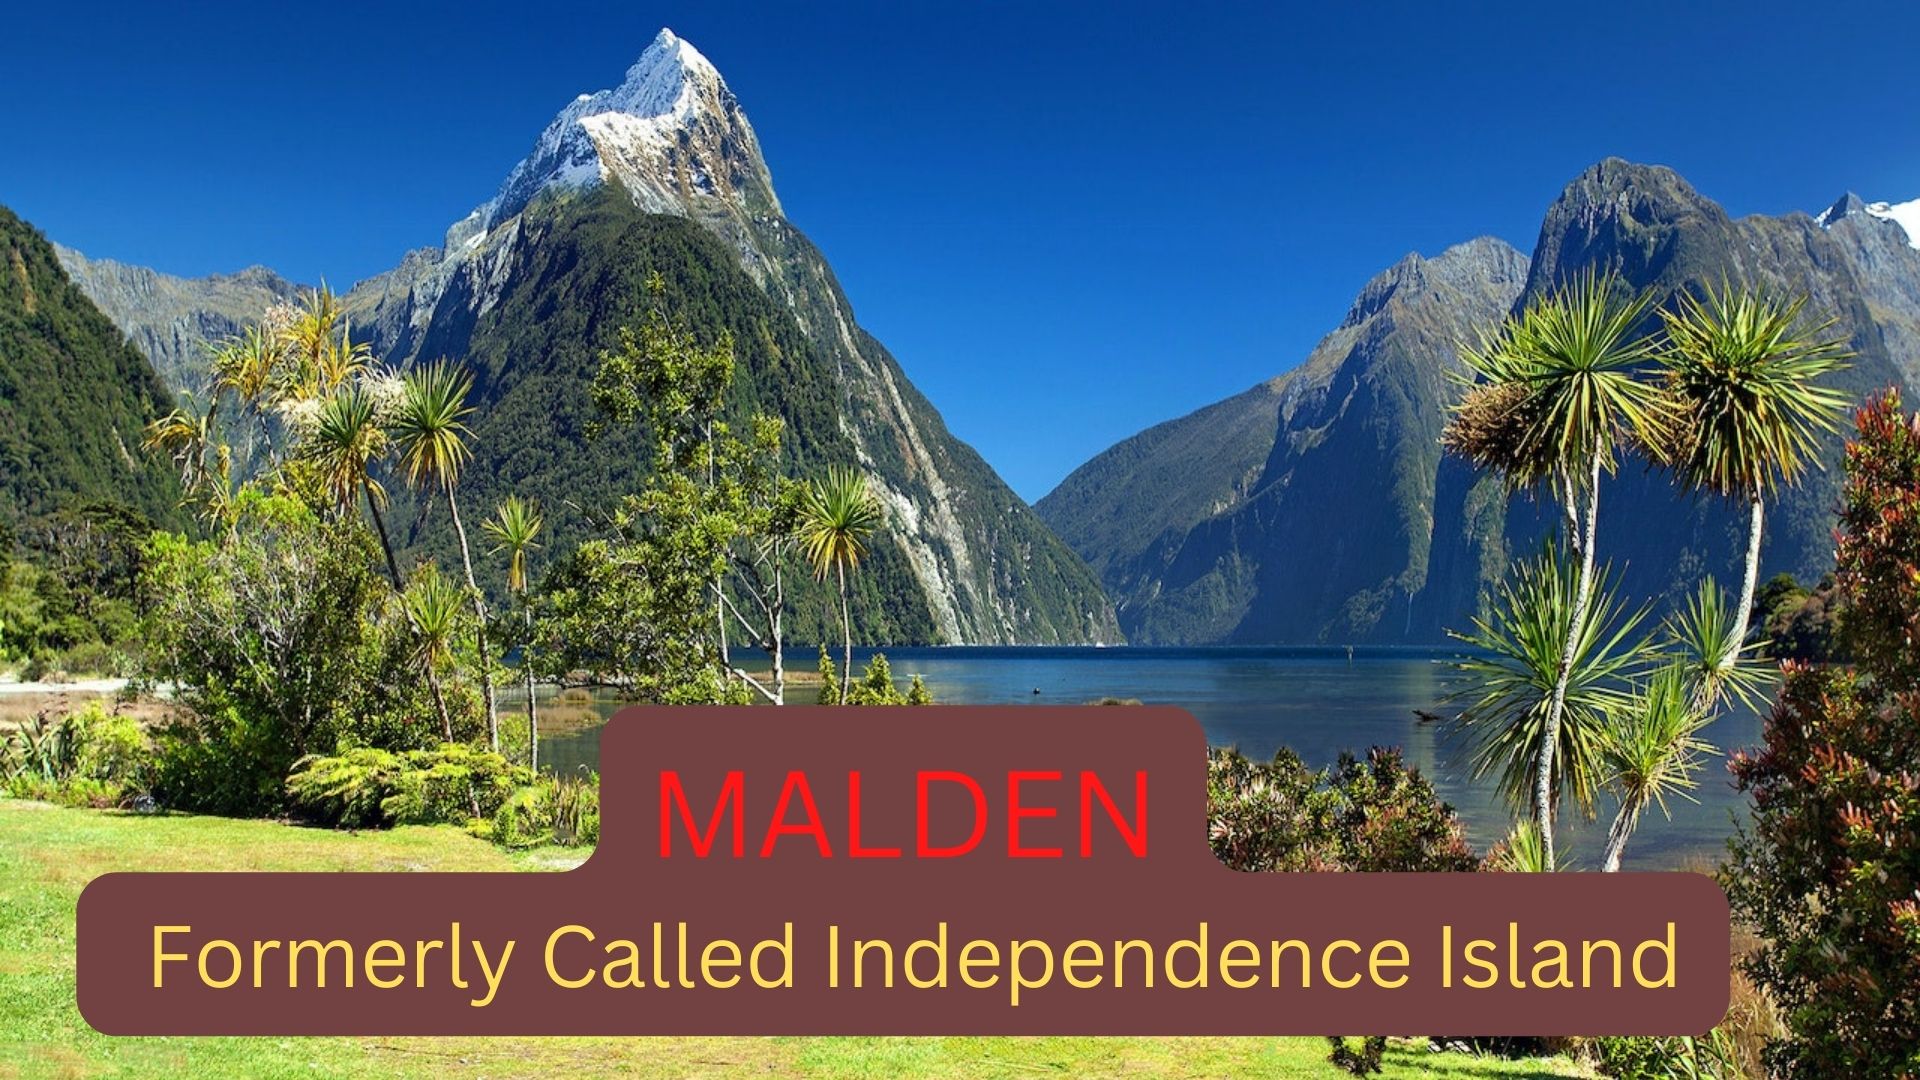 Malden - Formerly Called Independence Island